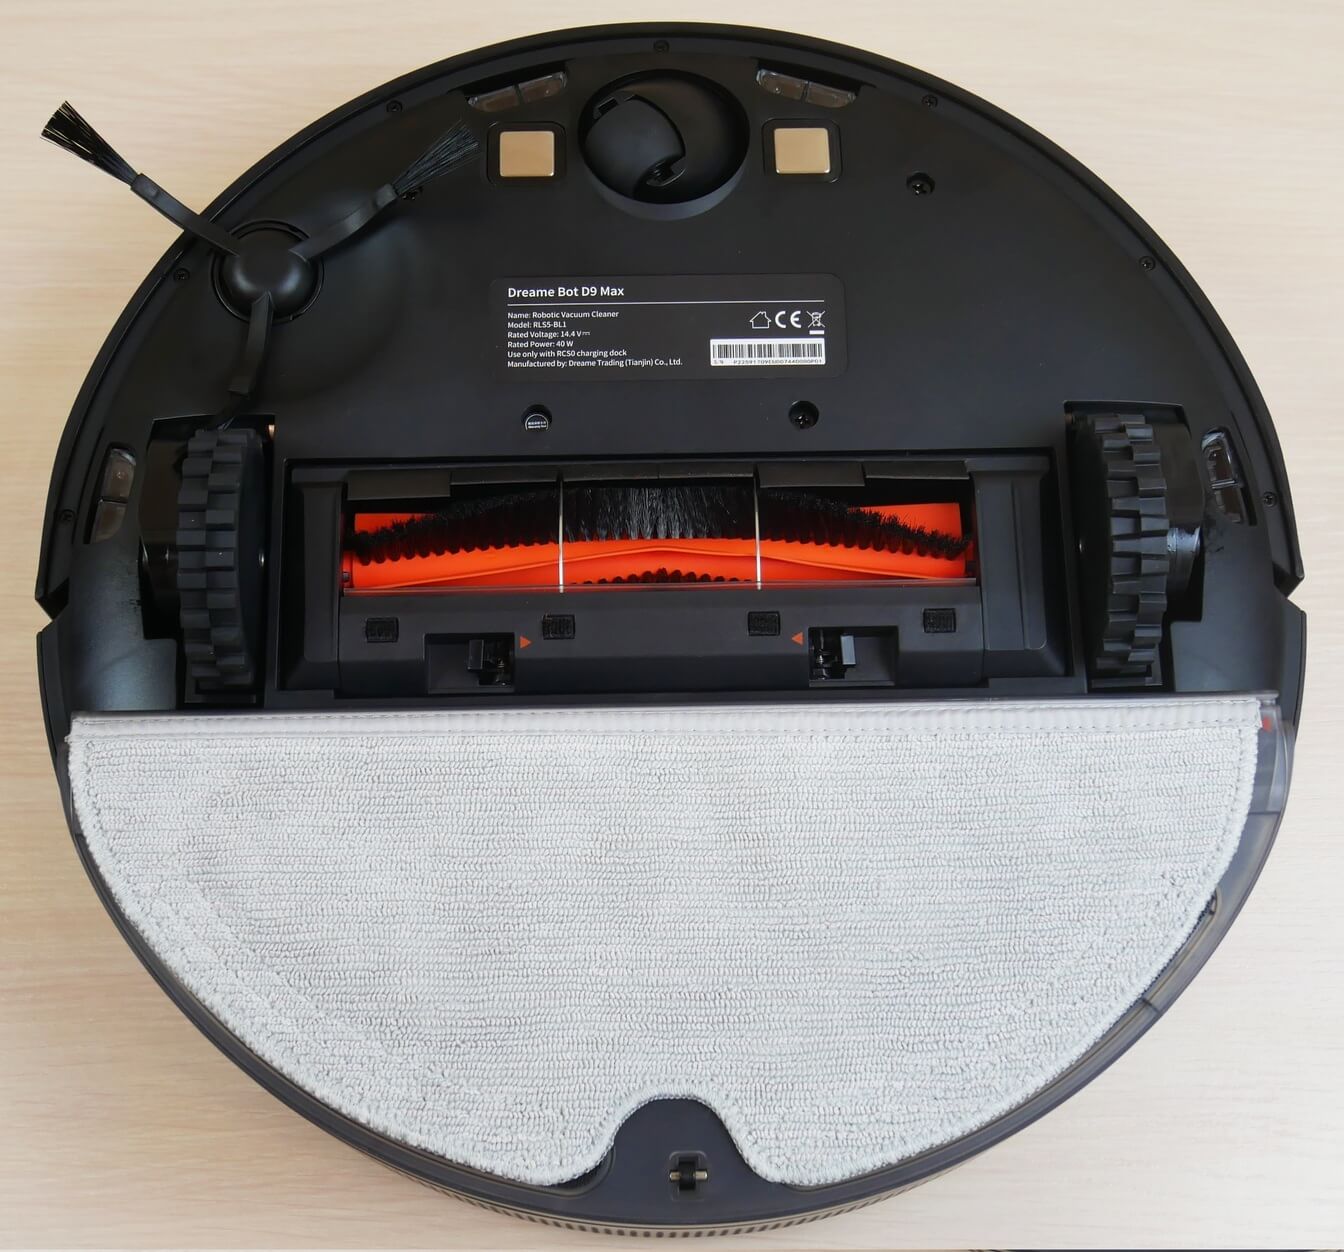 Dreame D9 Max review: Versatile robot vacuum cleaner with sweeping